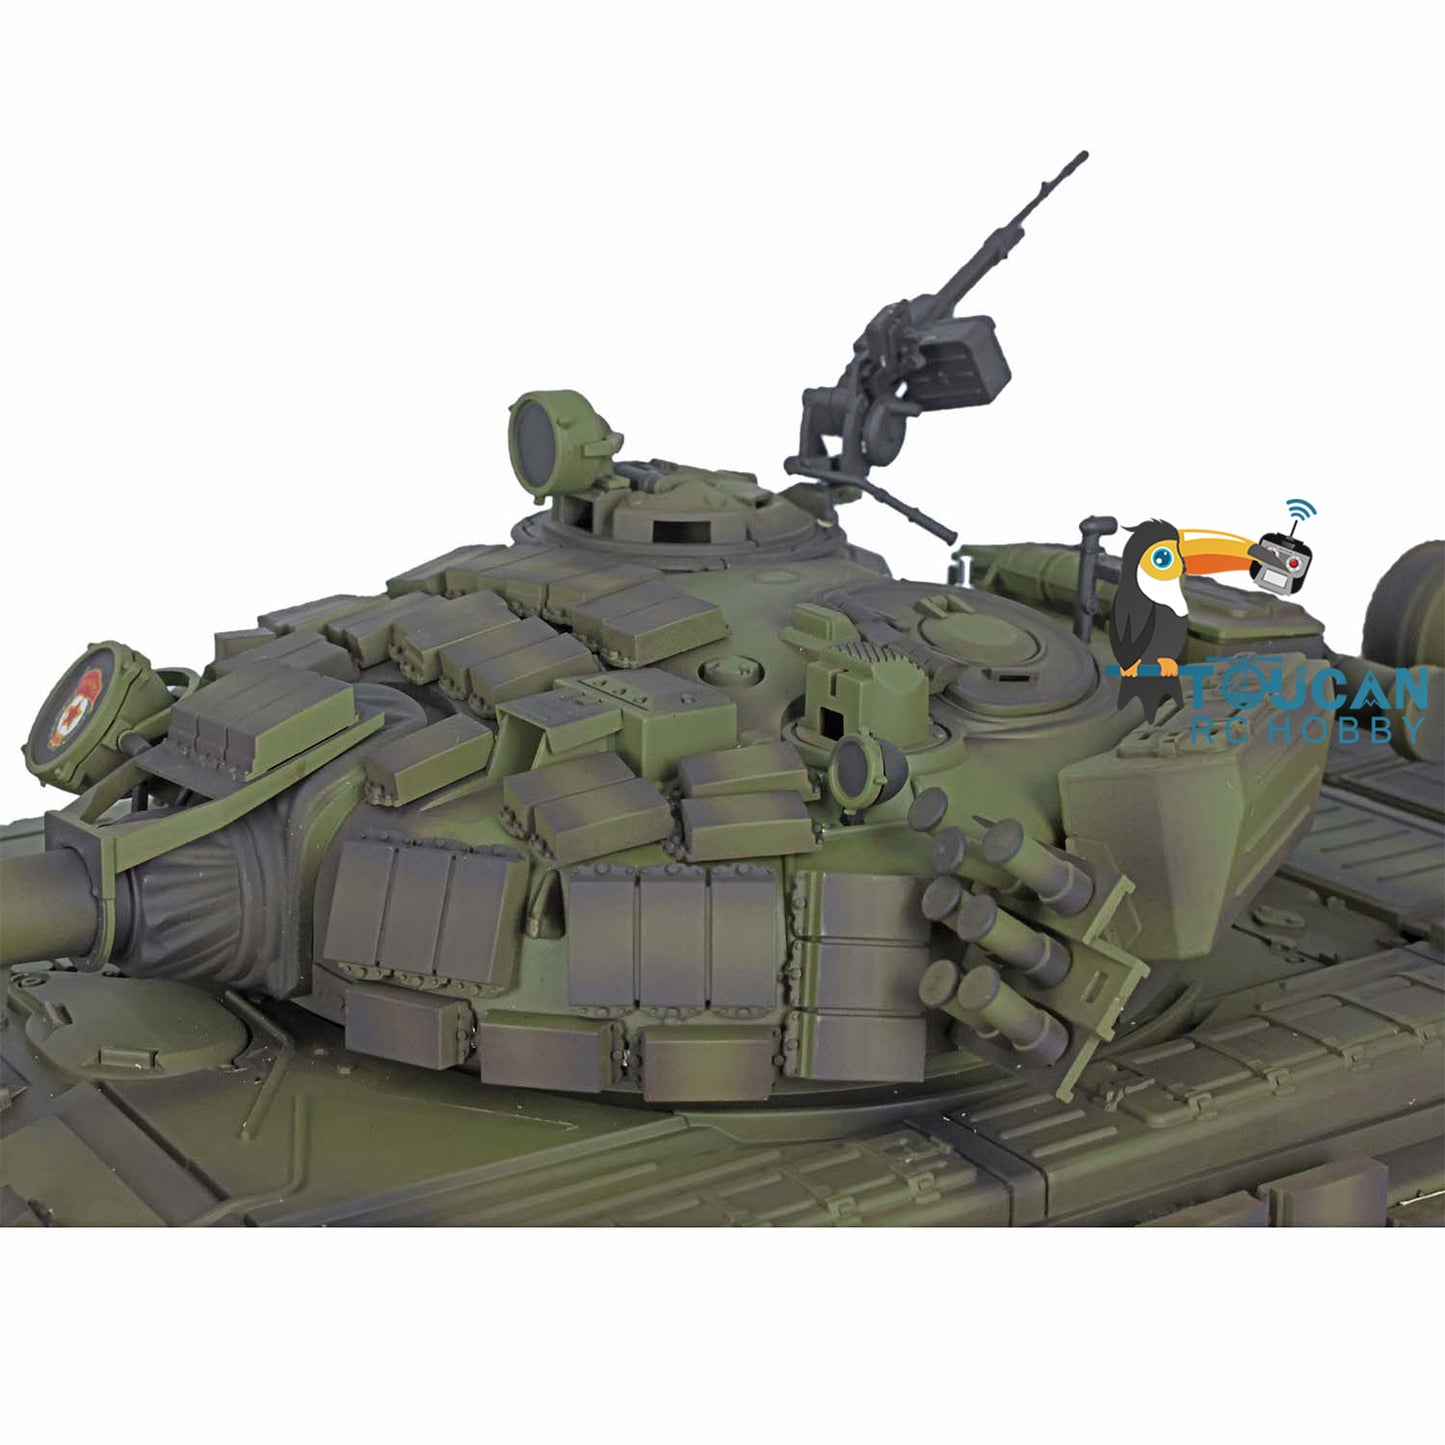 Heng Long Russia T72 1/16 RC Battle Tank TK7.0 Mainboard Plastic Edition 3939 Ready to Run Tank Smoke Infrared System Sound